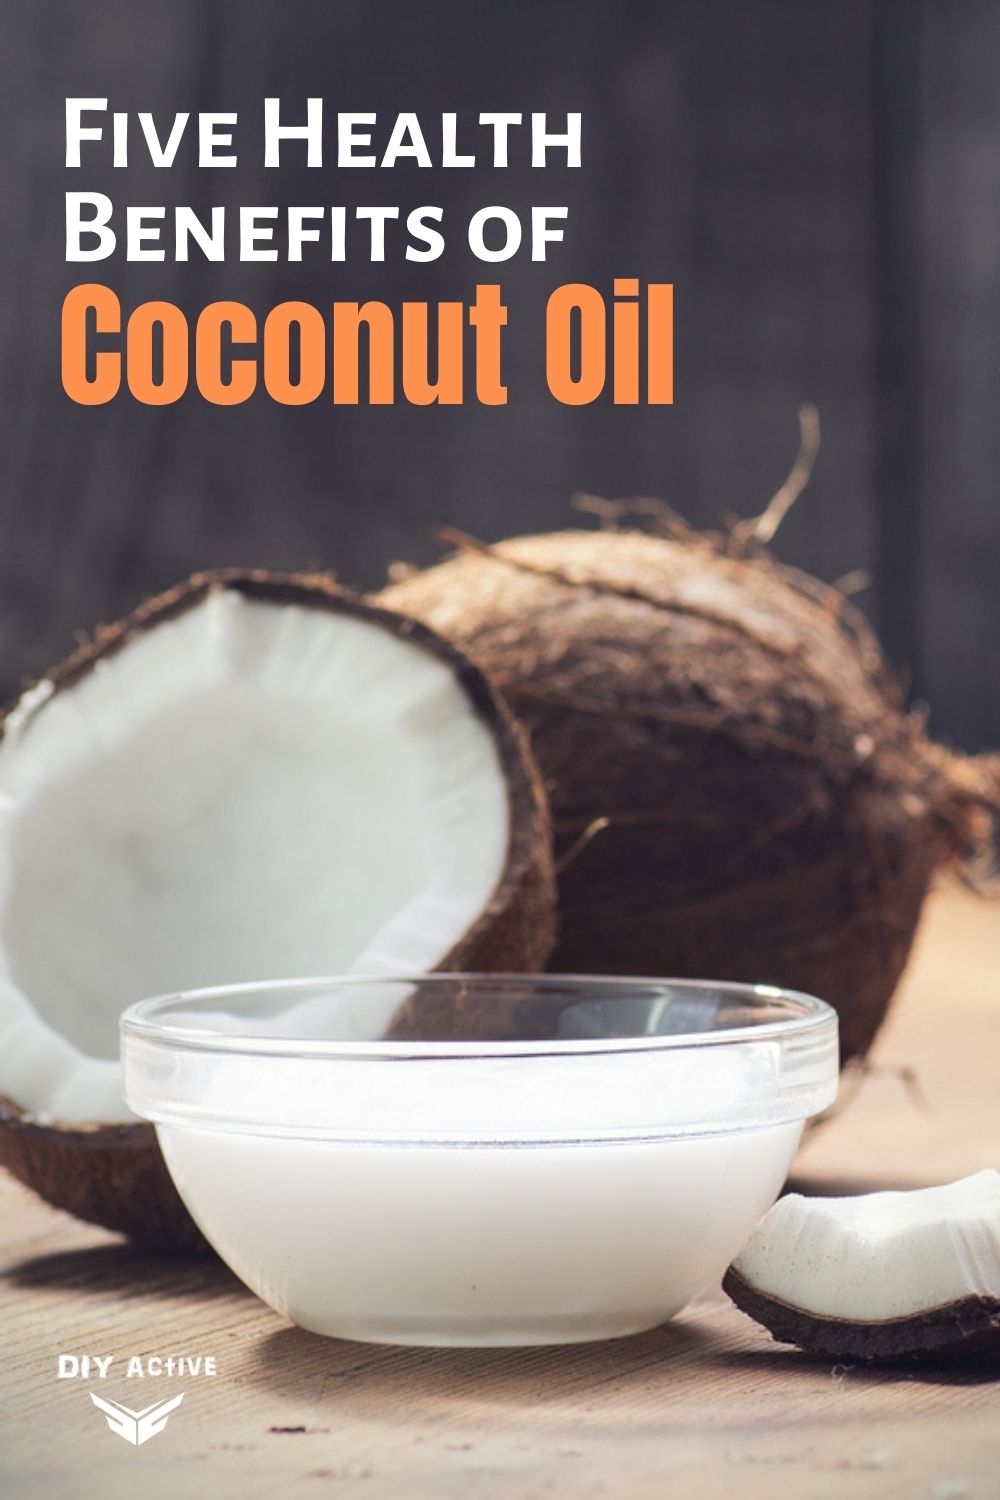 5 Day Coconut Oil After Workout for Women